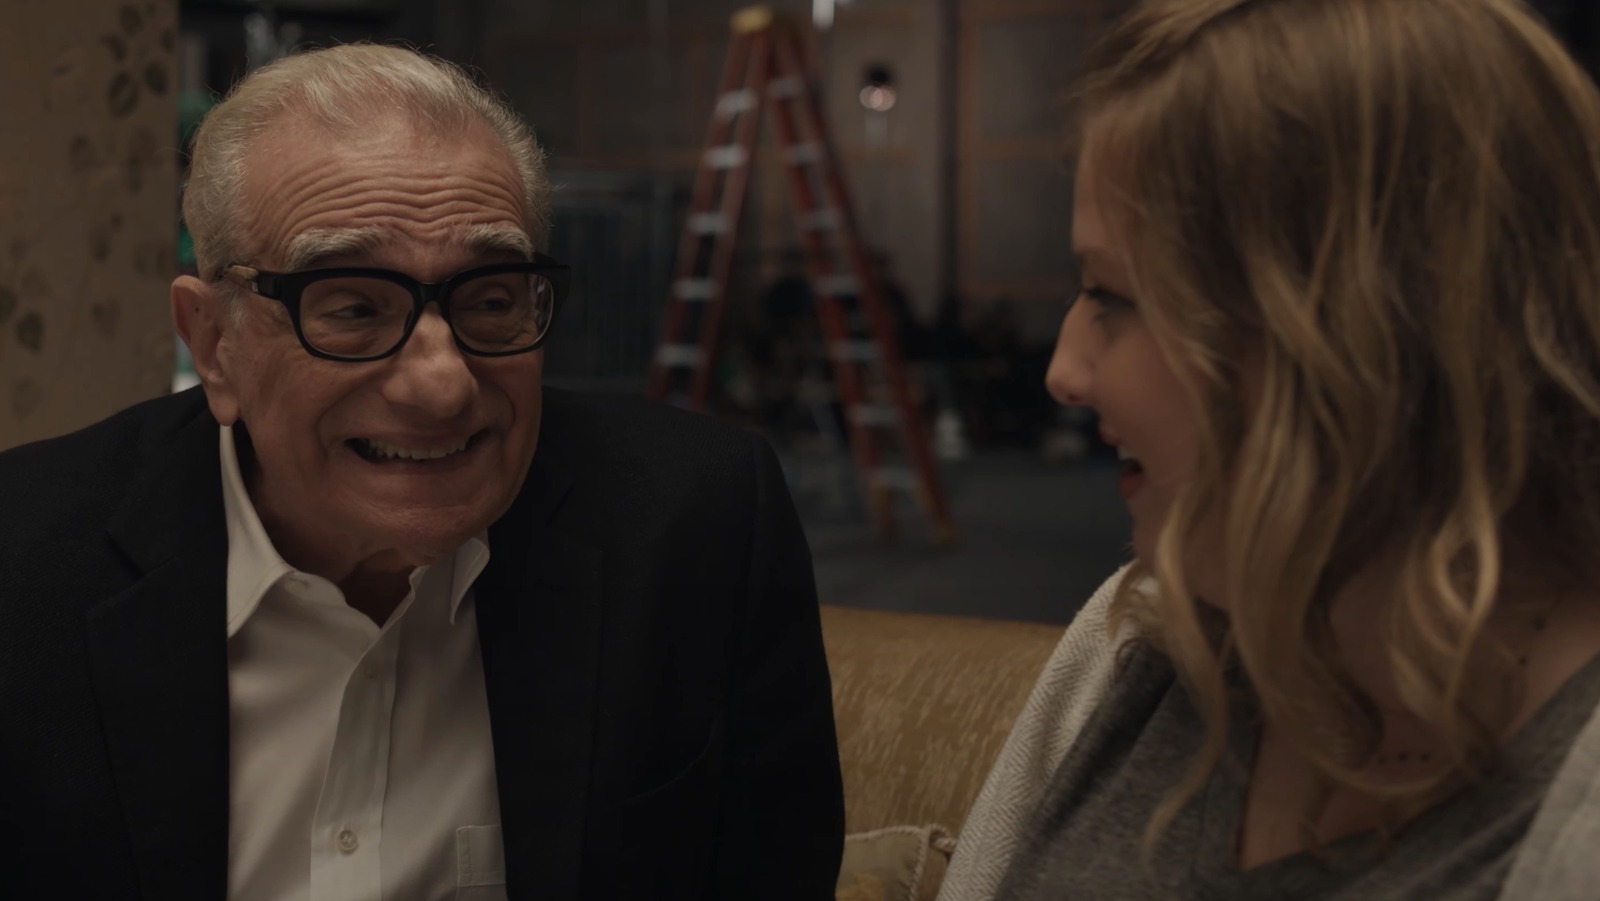 Martin And Francesca Scorsese Make A Website In Squarespace’s Super Bowl Commercial [Video]